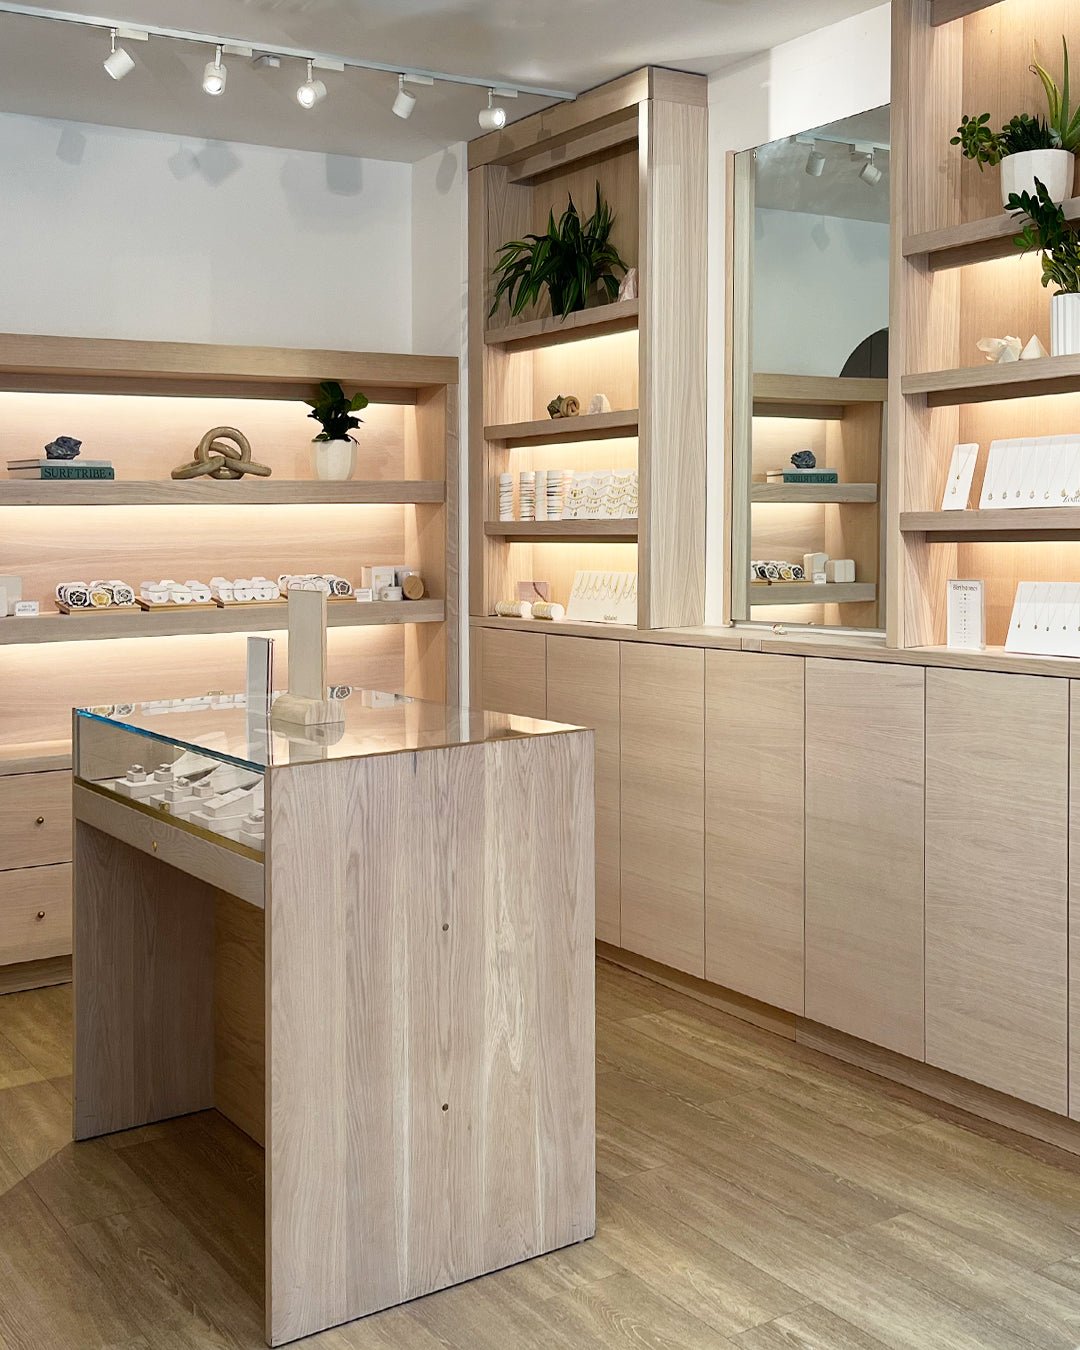 gorjana west village store with elevated wood cabinets and shelving